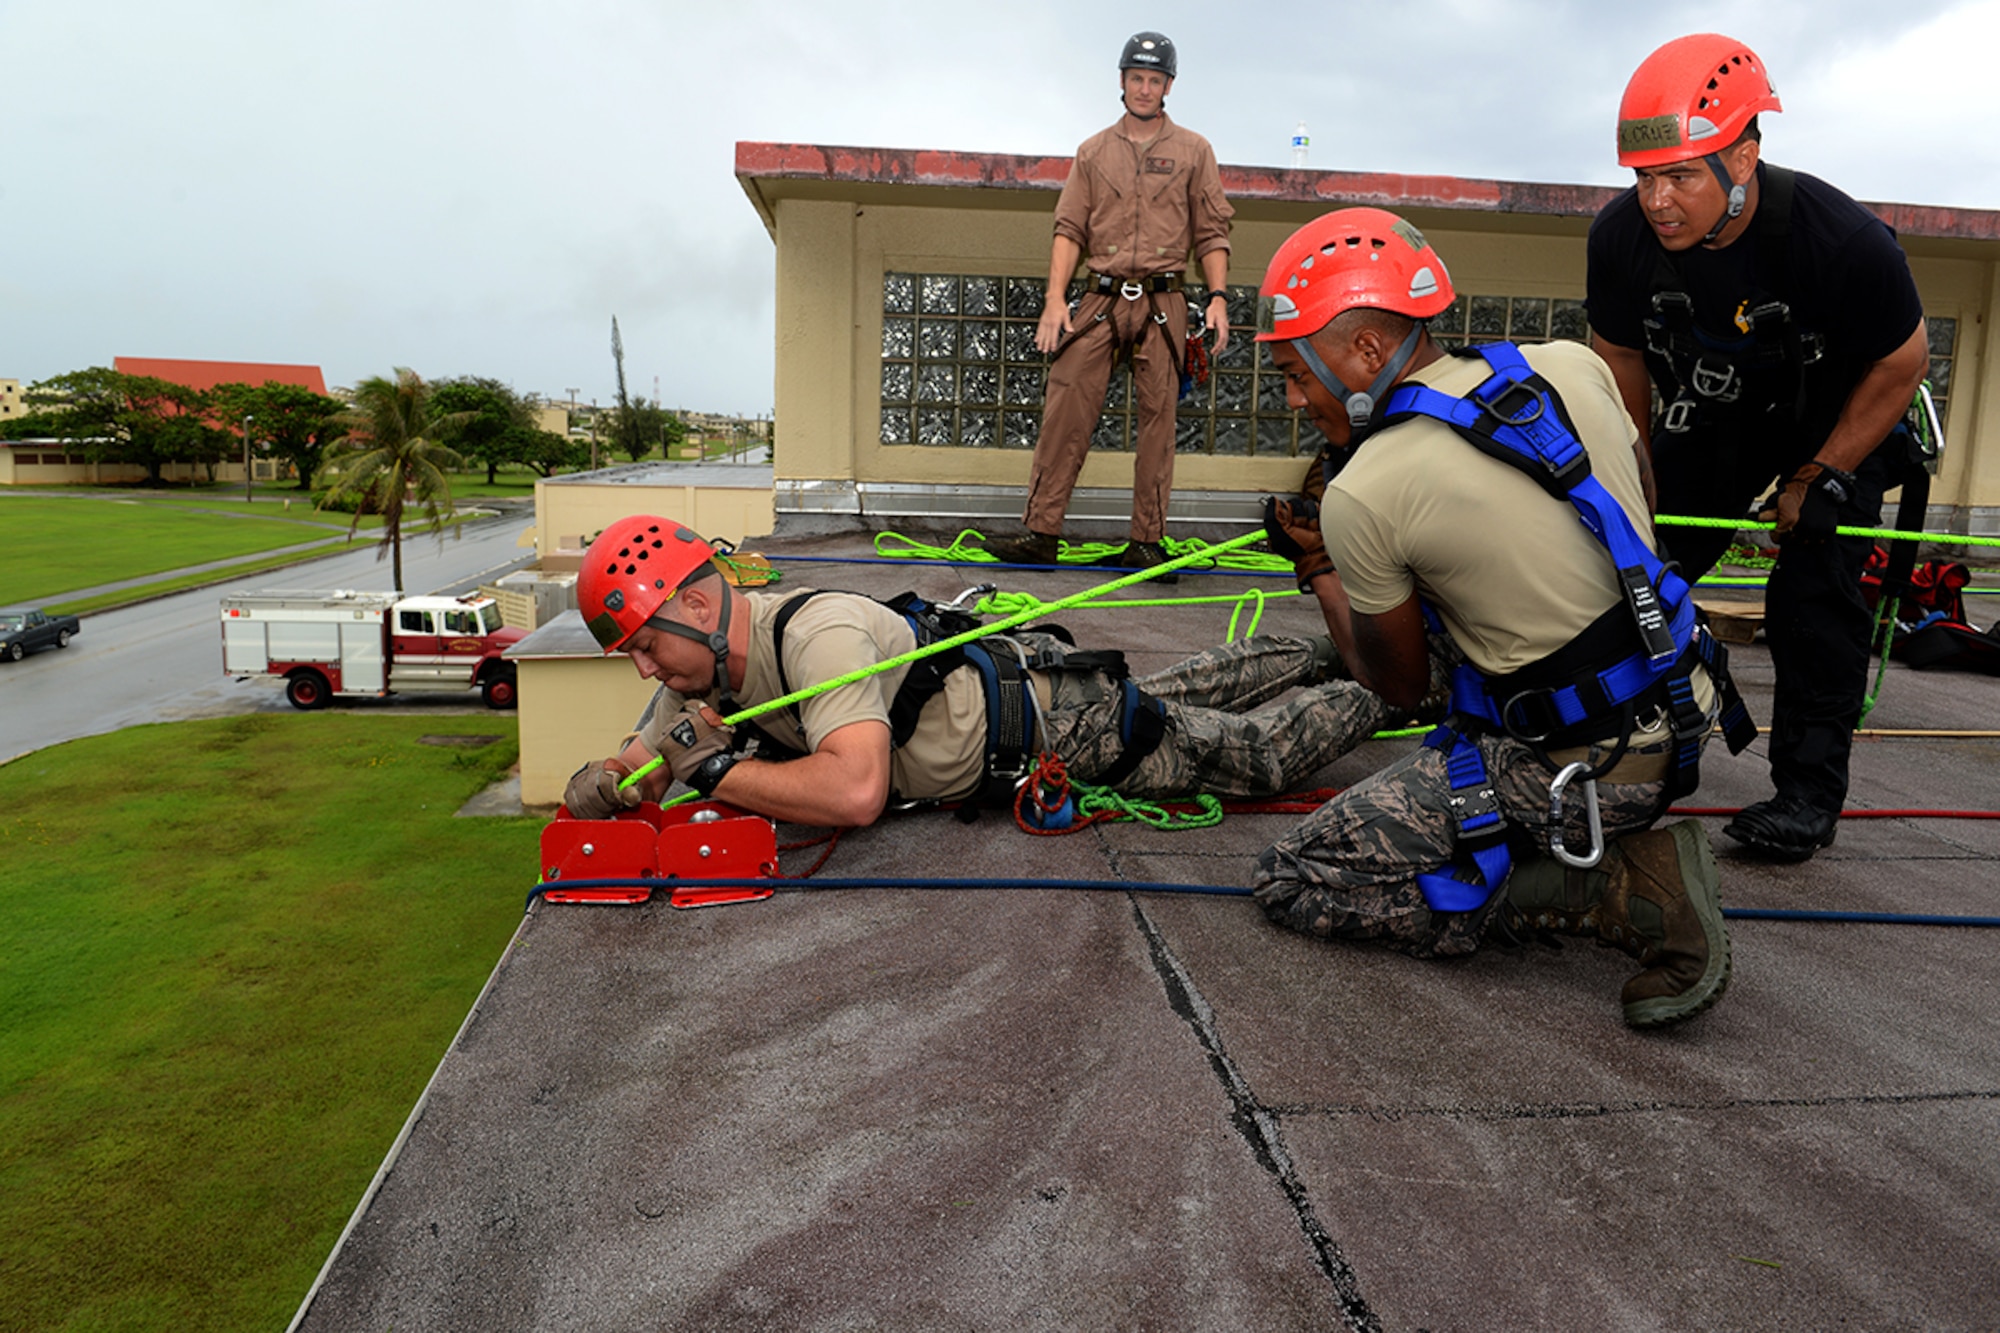 Staff Sgt. Nathan Milan, center, monitors firefighters, from Naval Base Guam and Andersen Air Force Base, as they lower a simulated victim from a hot spot on a roof during the Defense Department Rescue Technician Course Sept. 16, 2014, on Andersen AFB, Guam. Milan is one of three instructors qualified to teach the specialized course on Guam and throughout the Pacific. (U.S. Air Force photo/Tech. Sgt. Zachary Wilson)  